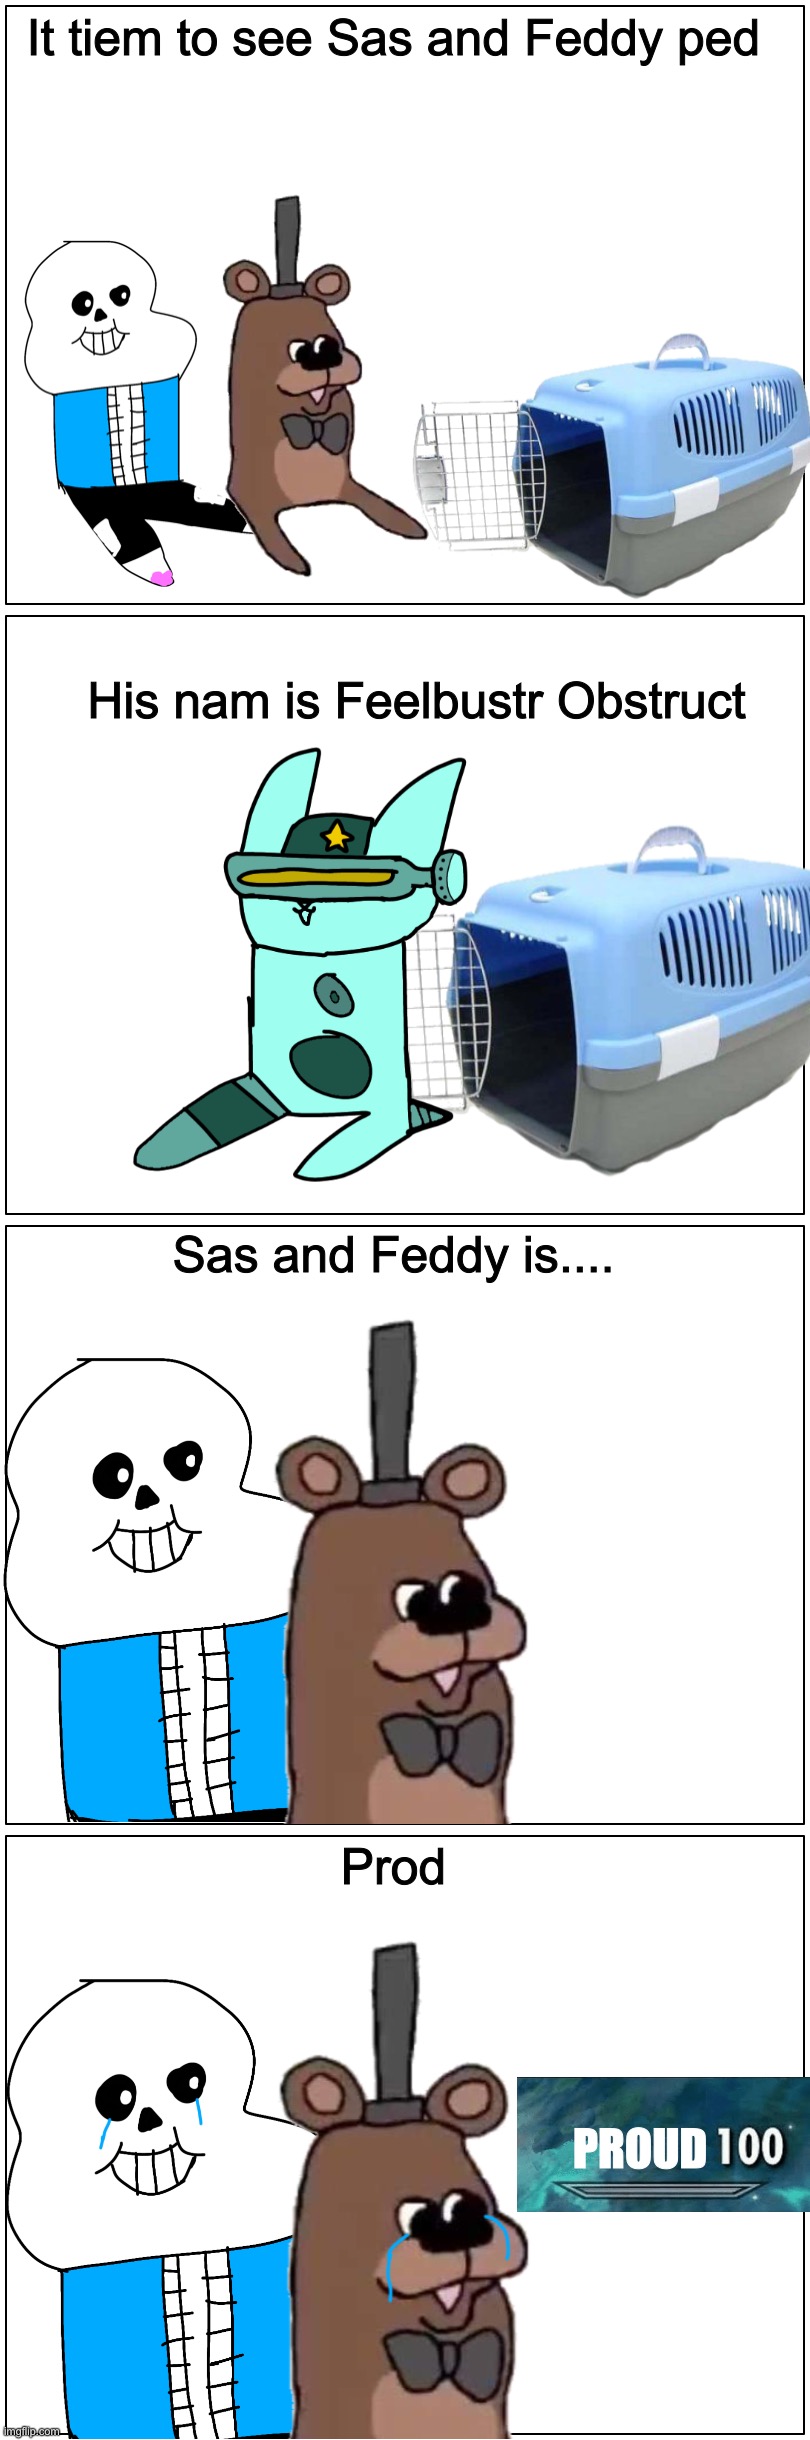 Sas and Feddy Part 4: Ped introducction | It tiem to see Sas and Feddy ped; His nam is Feelbustr Obstruct; Sas and Feddy is.... Prod; PROUD | image tagged in memes,funny,sans,freddy fazbear,crossover,cats | made w/ Imgflip meme maker